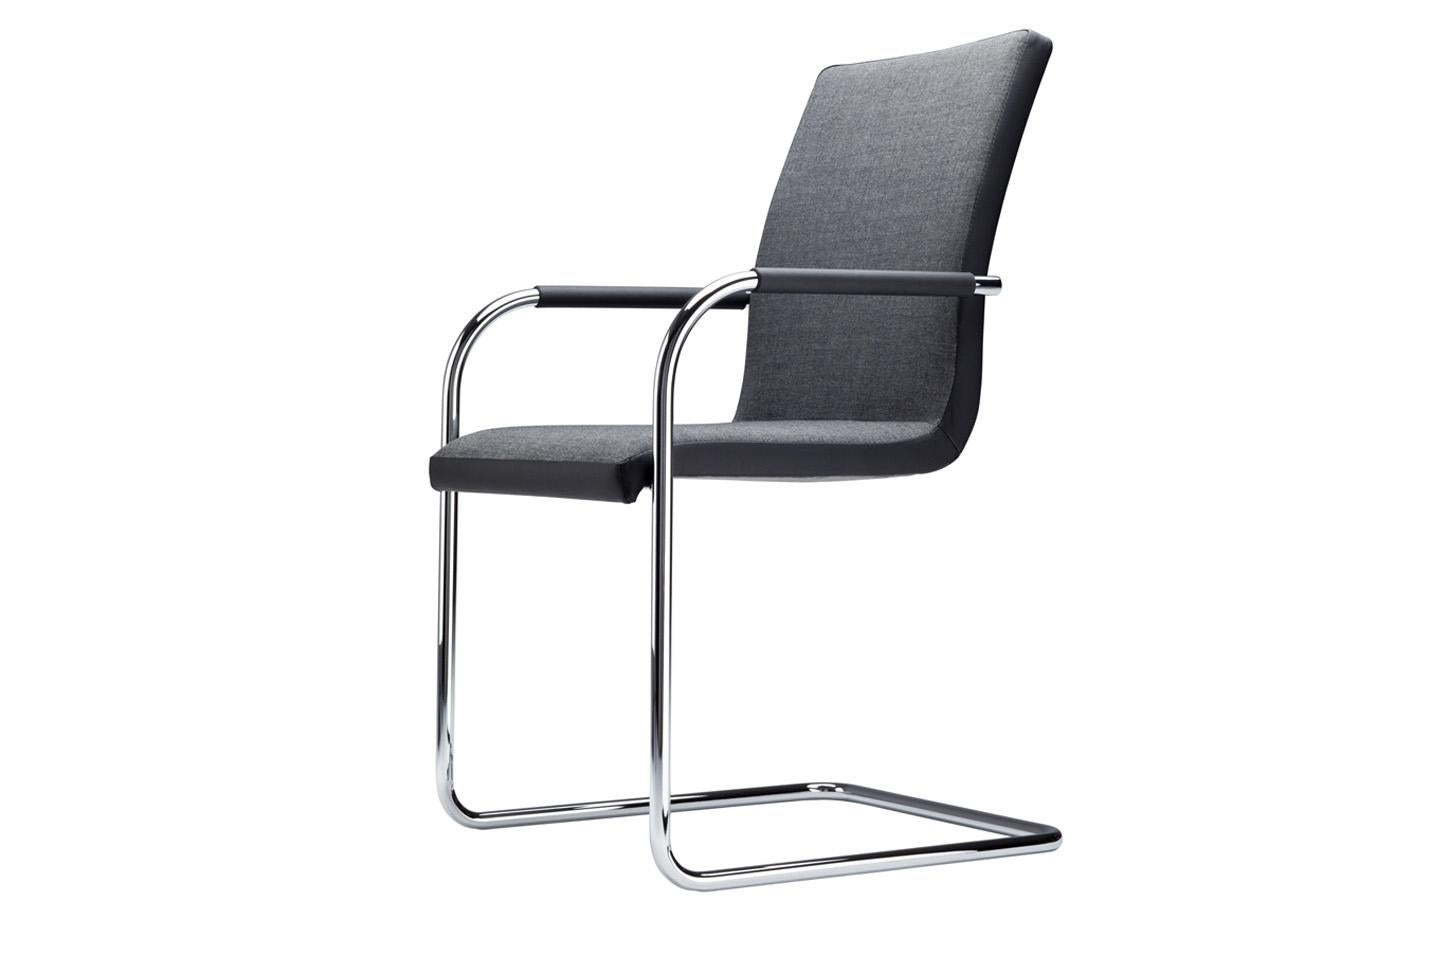 Range S 55
A comfortable and elegant all-rounder, based on the construction principle of the cantilever chair. With its one-piece seat shell it offers the highest possible comfort, has a formally clear design and is produced in the typically high